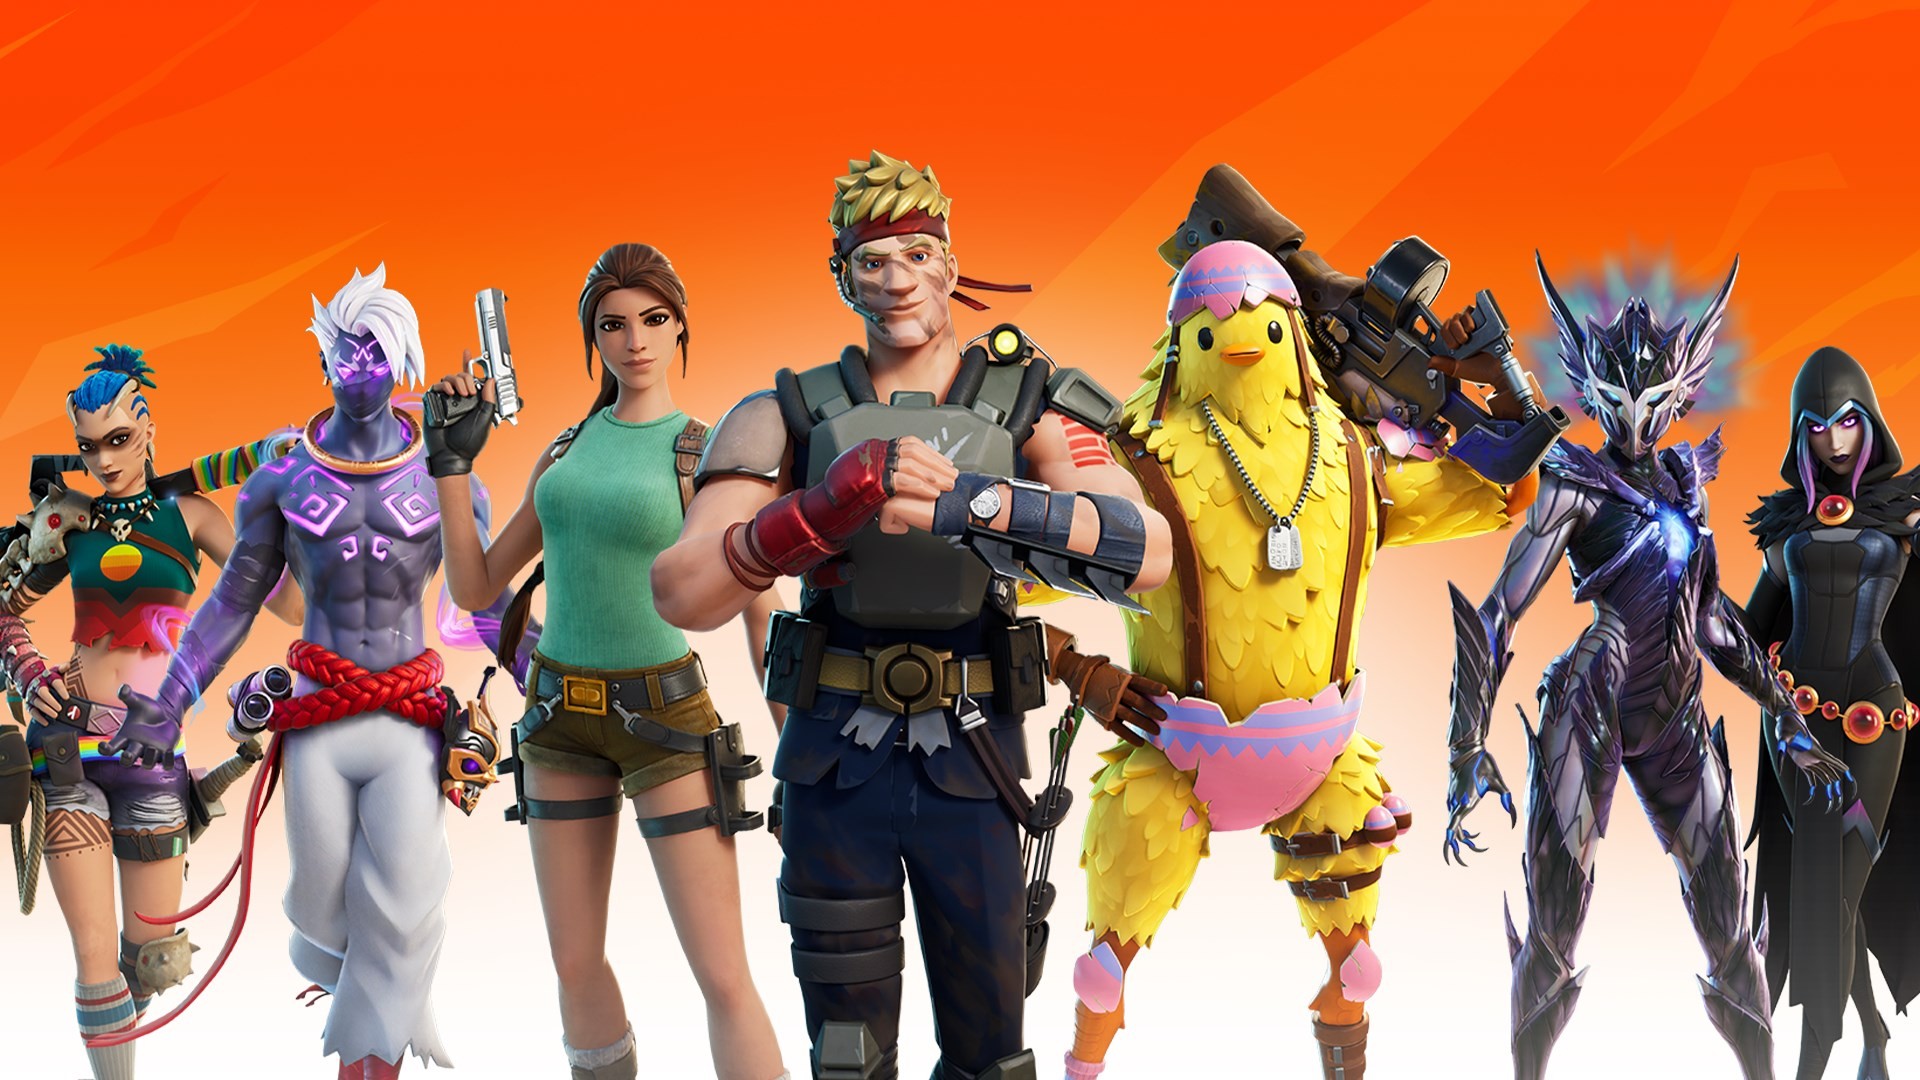 Vice Fortnite Wallpapers